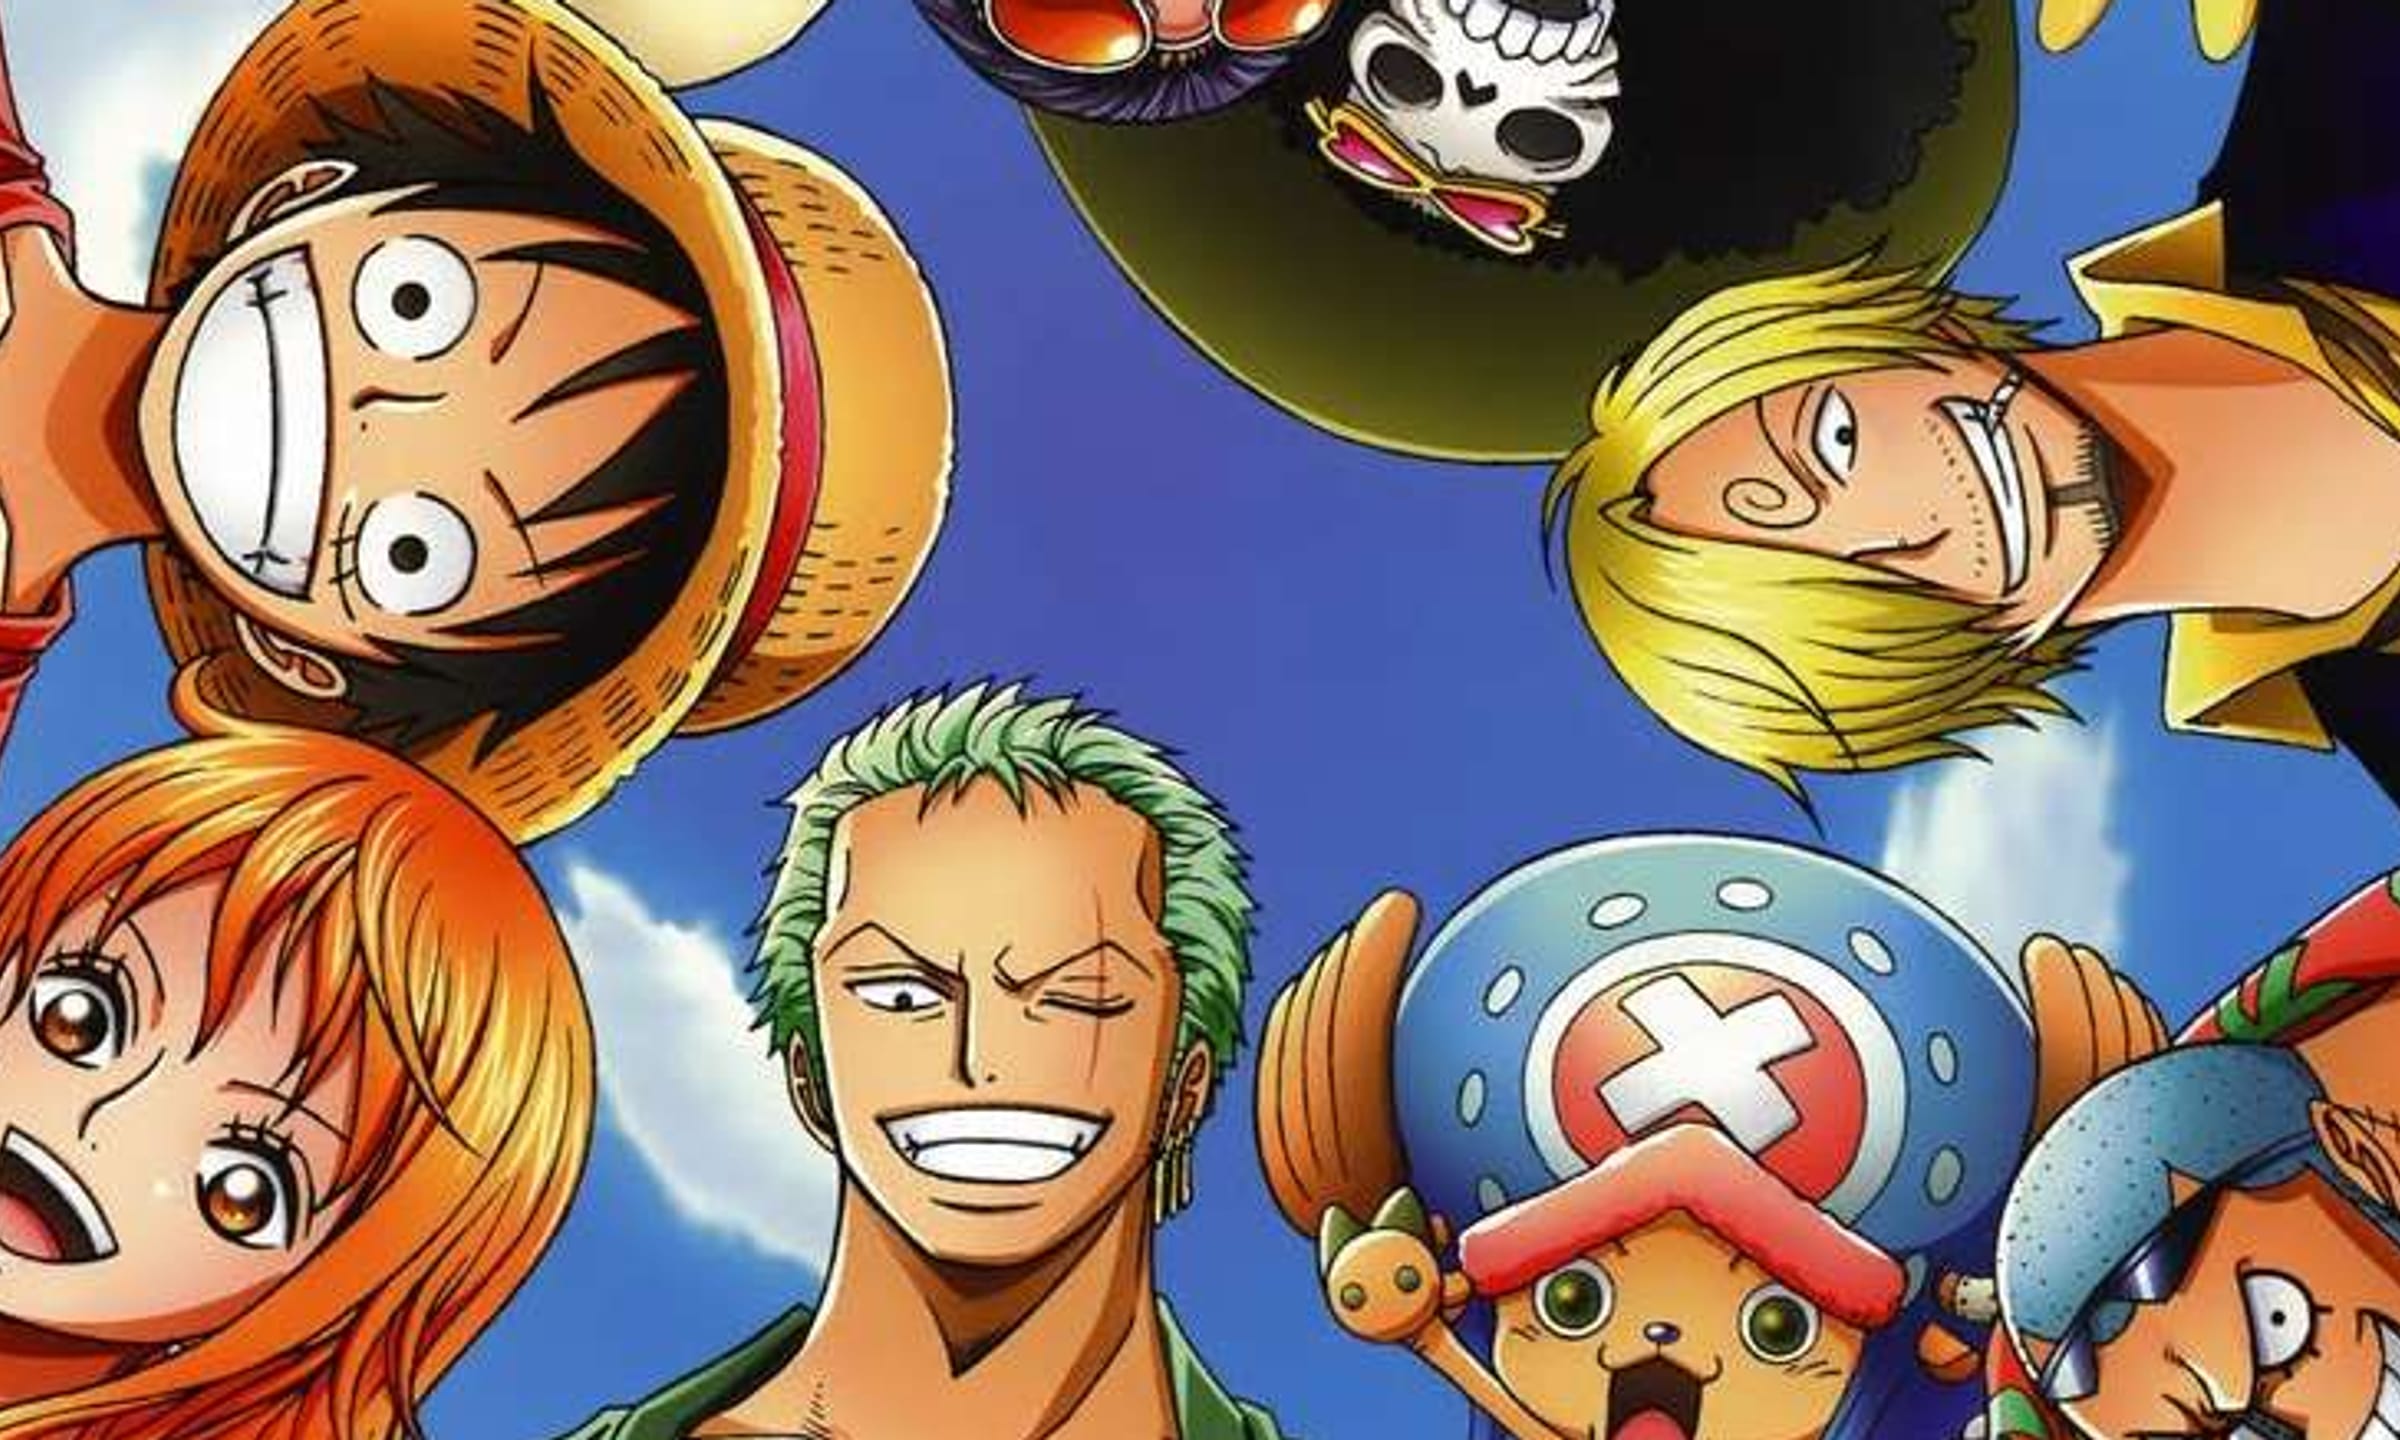 chantelle townsend recommends pictures of one piece characters pic